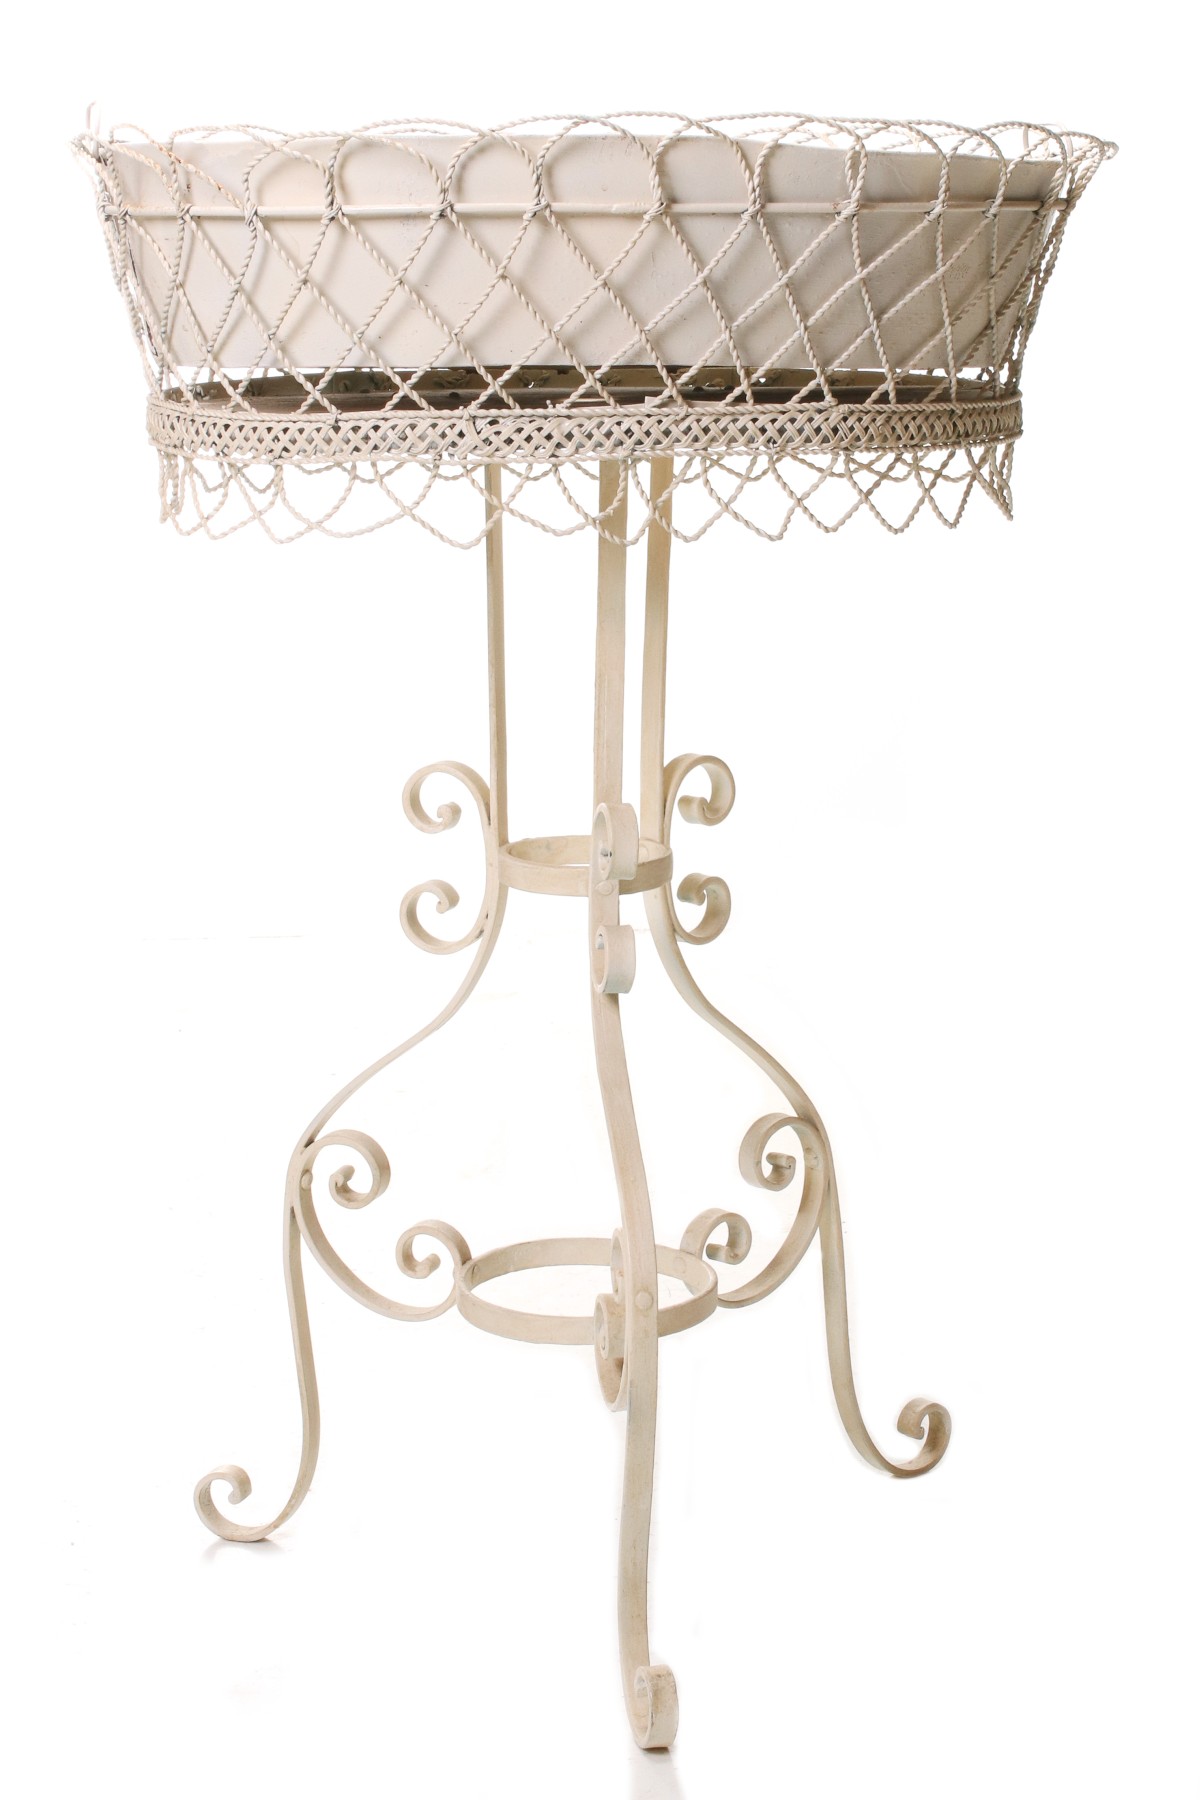 A MID 20TH CENTURY WIREWORK AND WROUGHT IRON STAND